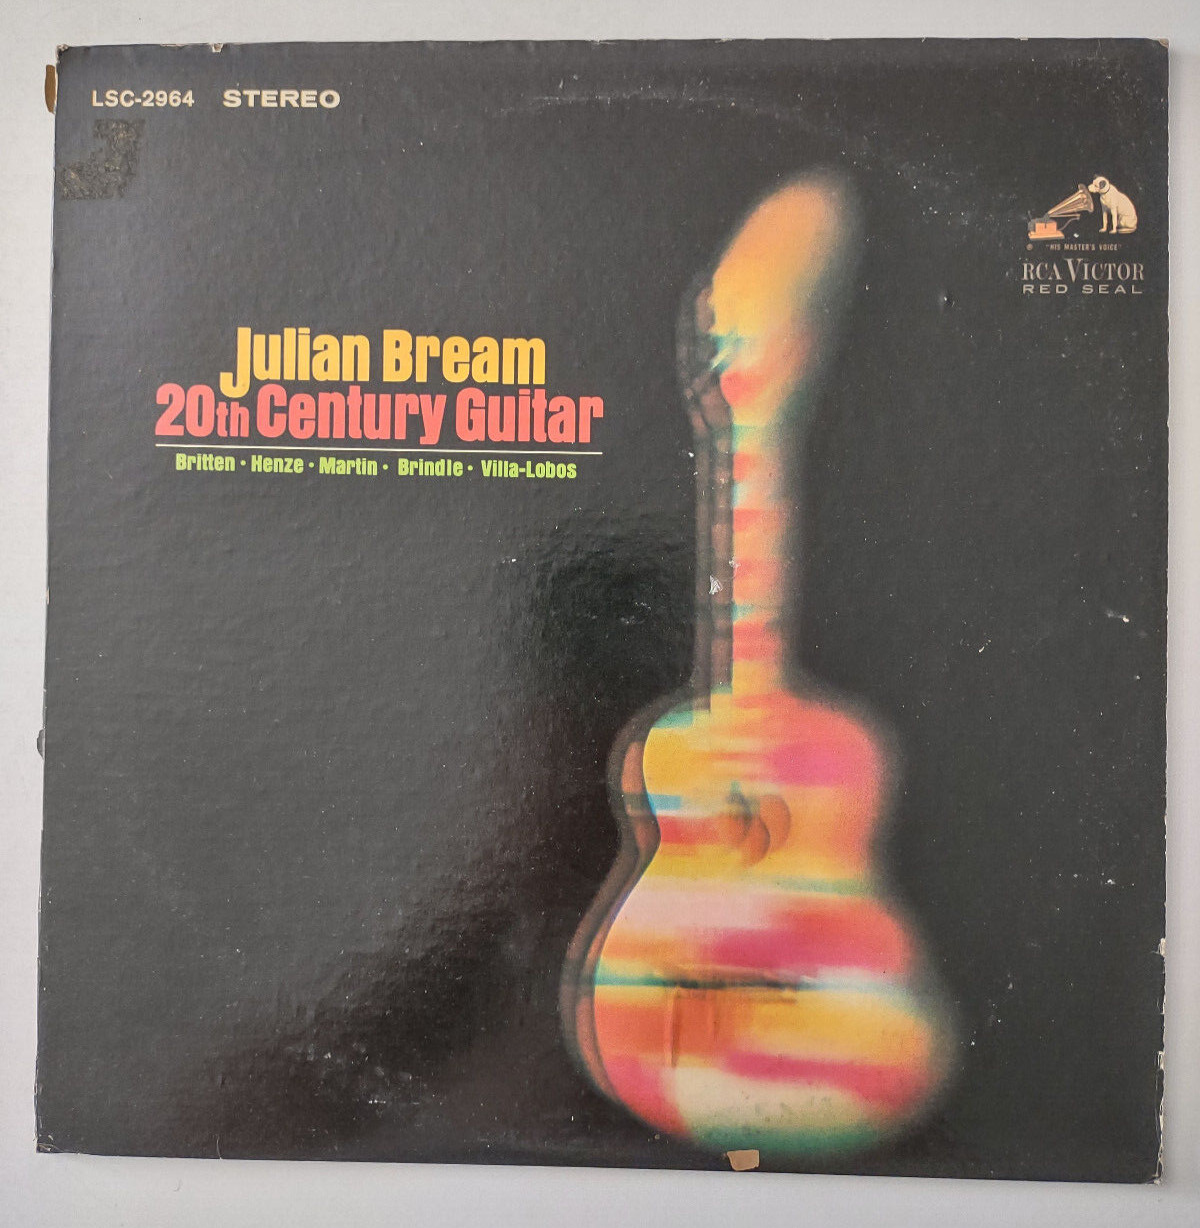 Julian Bream 20th Century Guitar vinyl record RCA Victor Tested Works LSC-2964